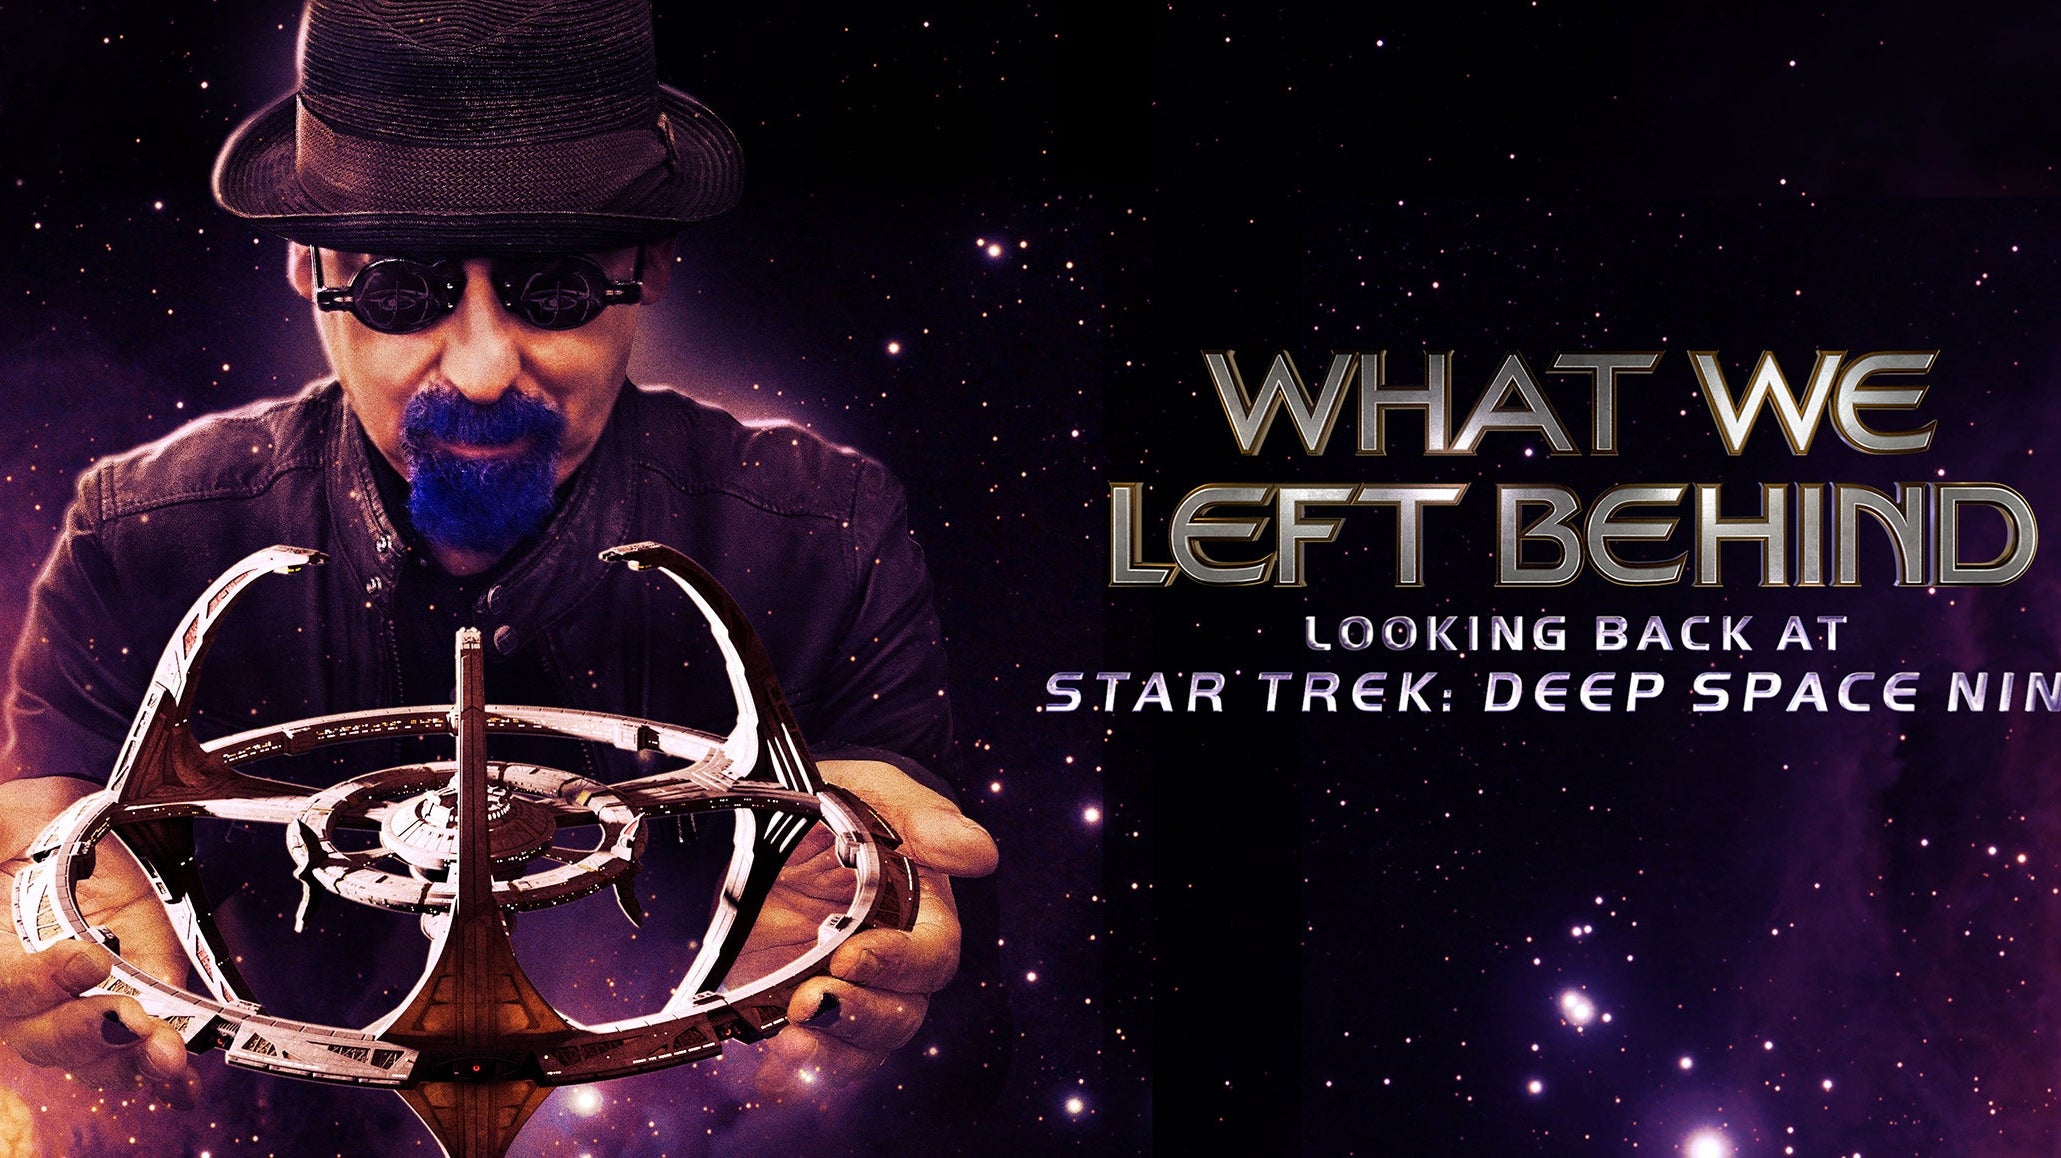 WHAT WE LEFT BEHIND: LOOKING BACK AT STAR TREK: DEEP SPACE NINE Lands in Movie Theaters Nationwide For One Night Only on May 13